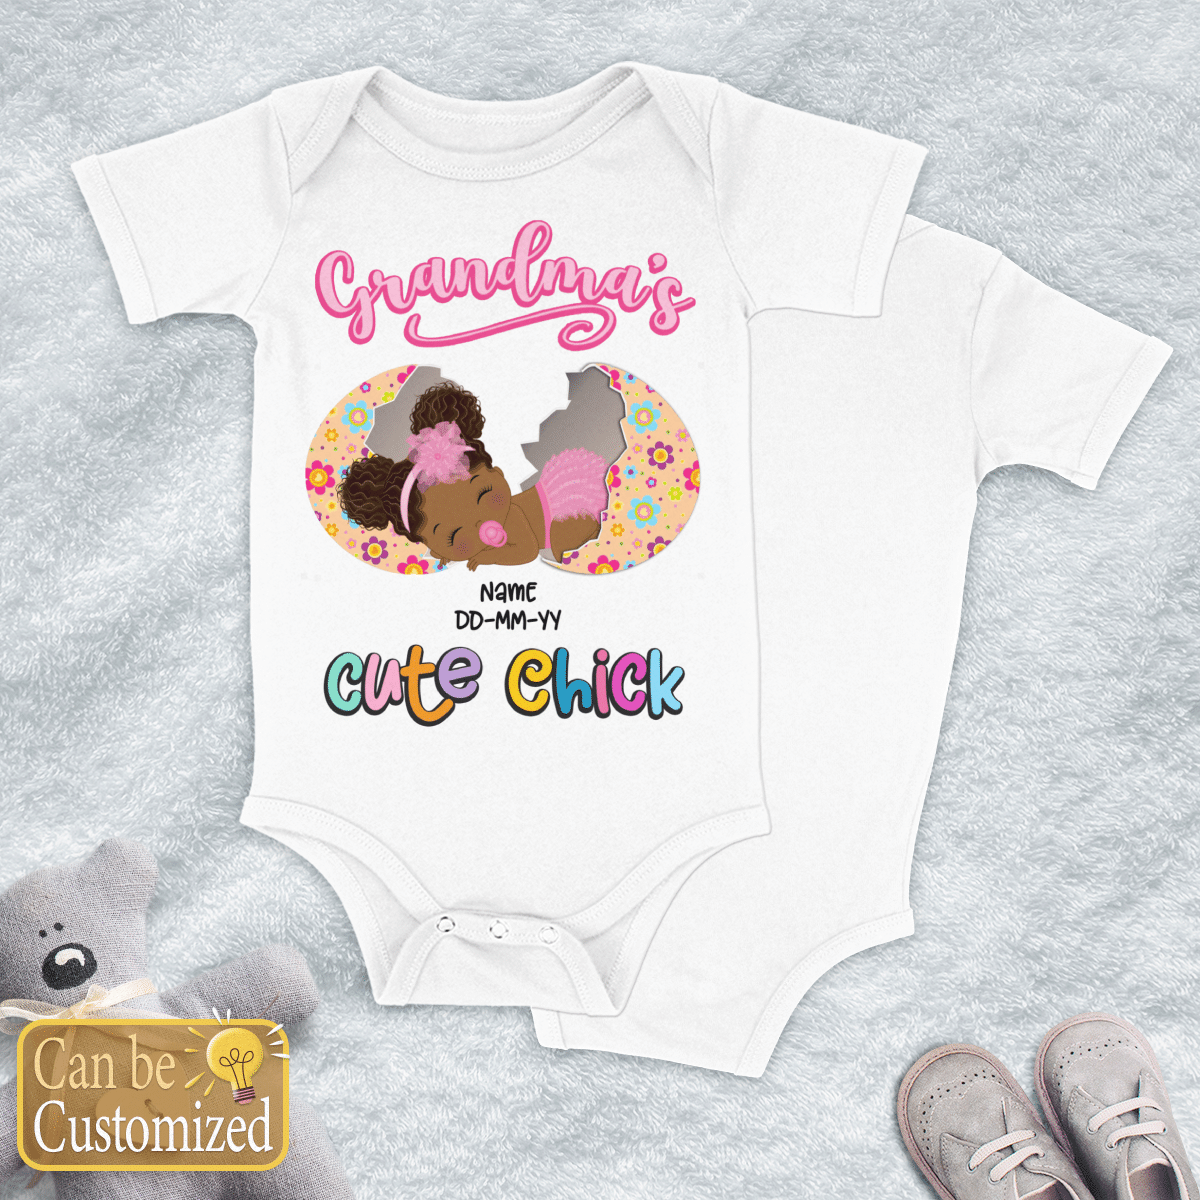 Happy Easter Day Personalized Shirt For Kid Grandma’S Cute Chick Baby Onesie Egg Baby Easter Day Onesie